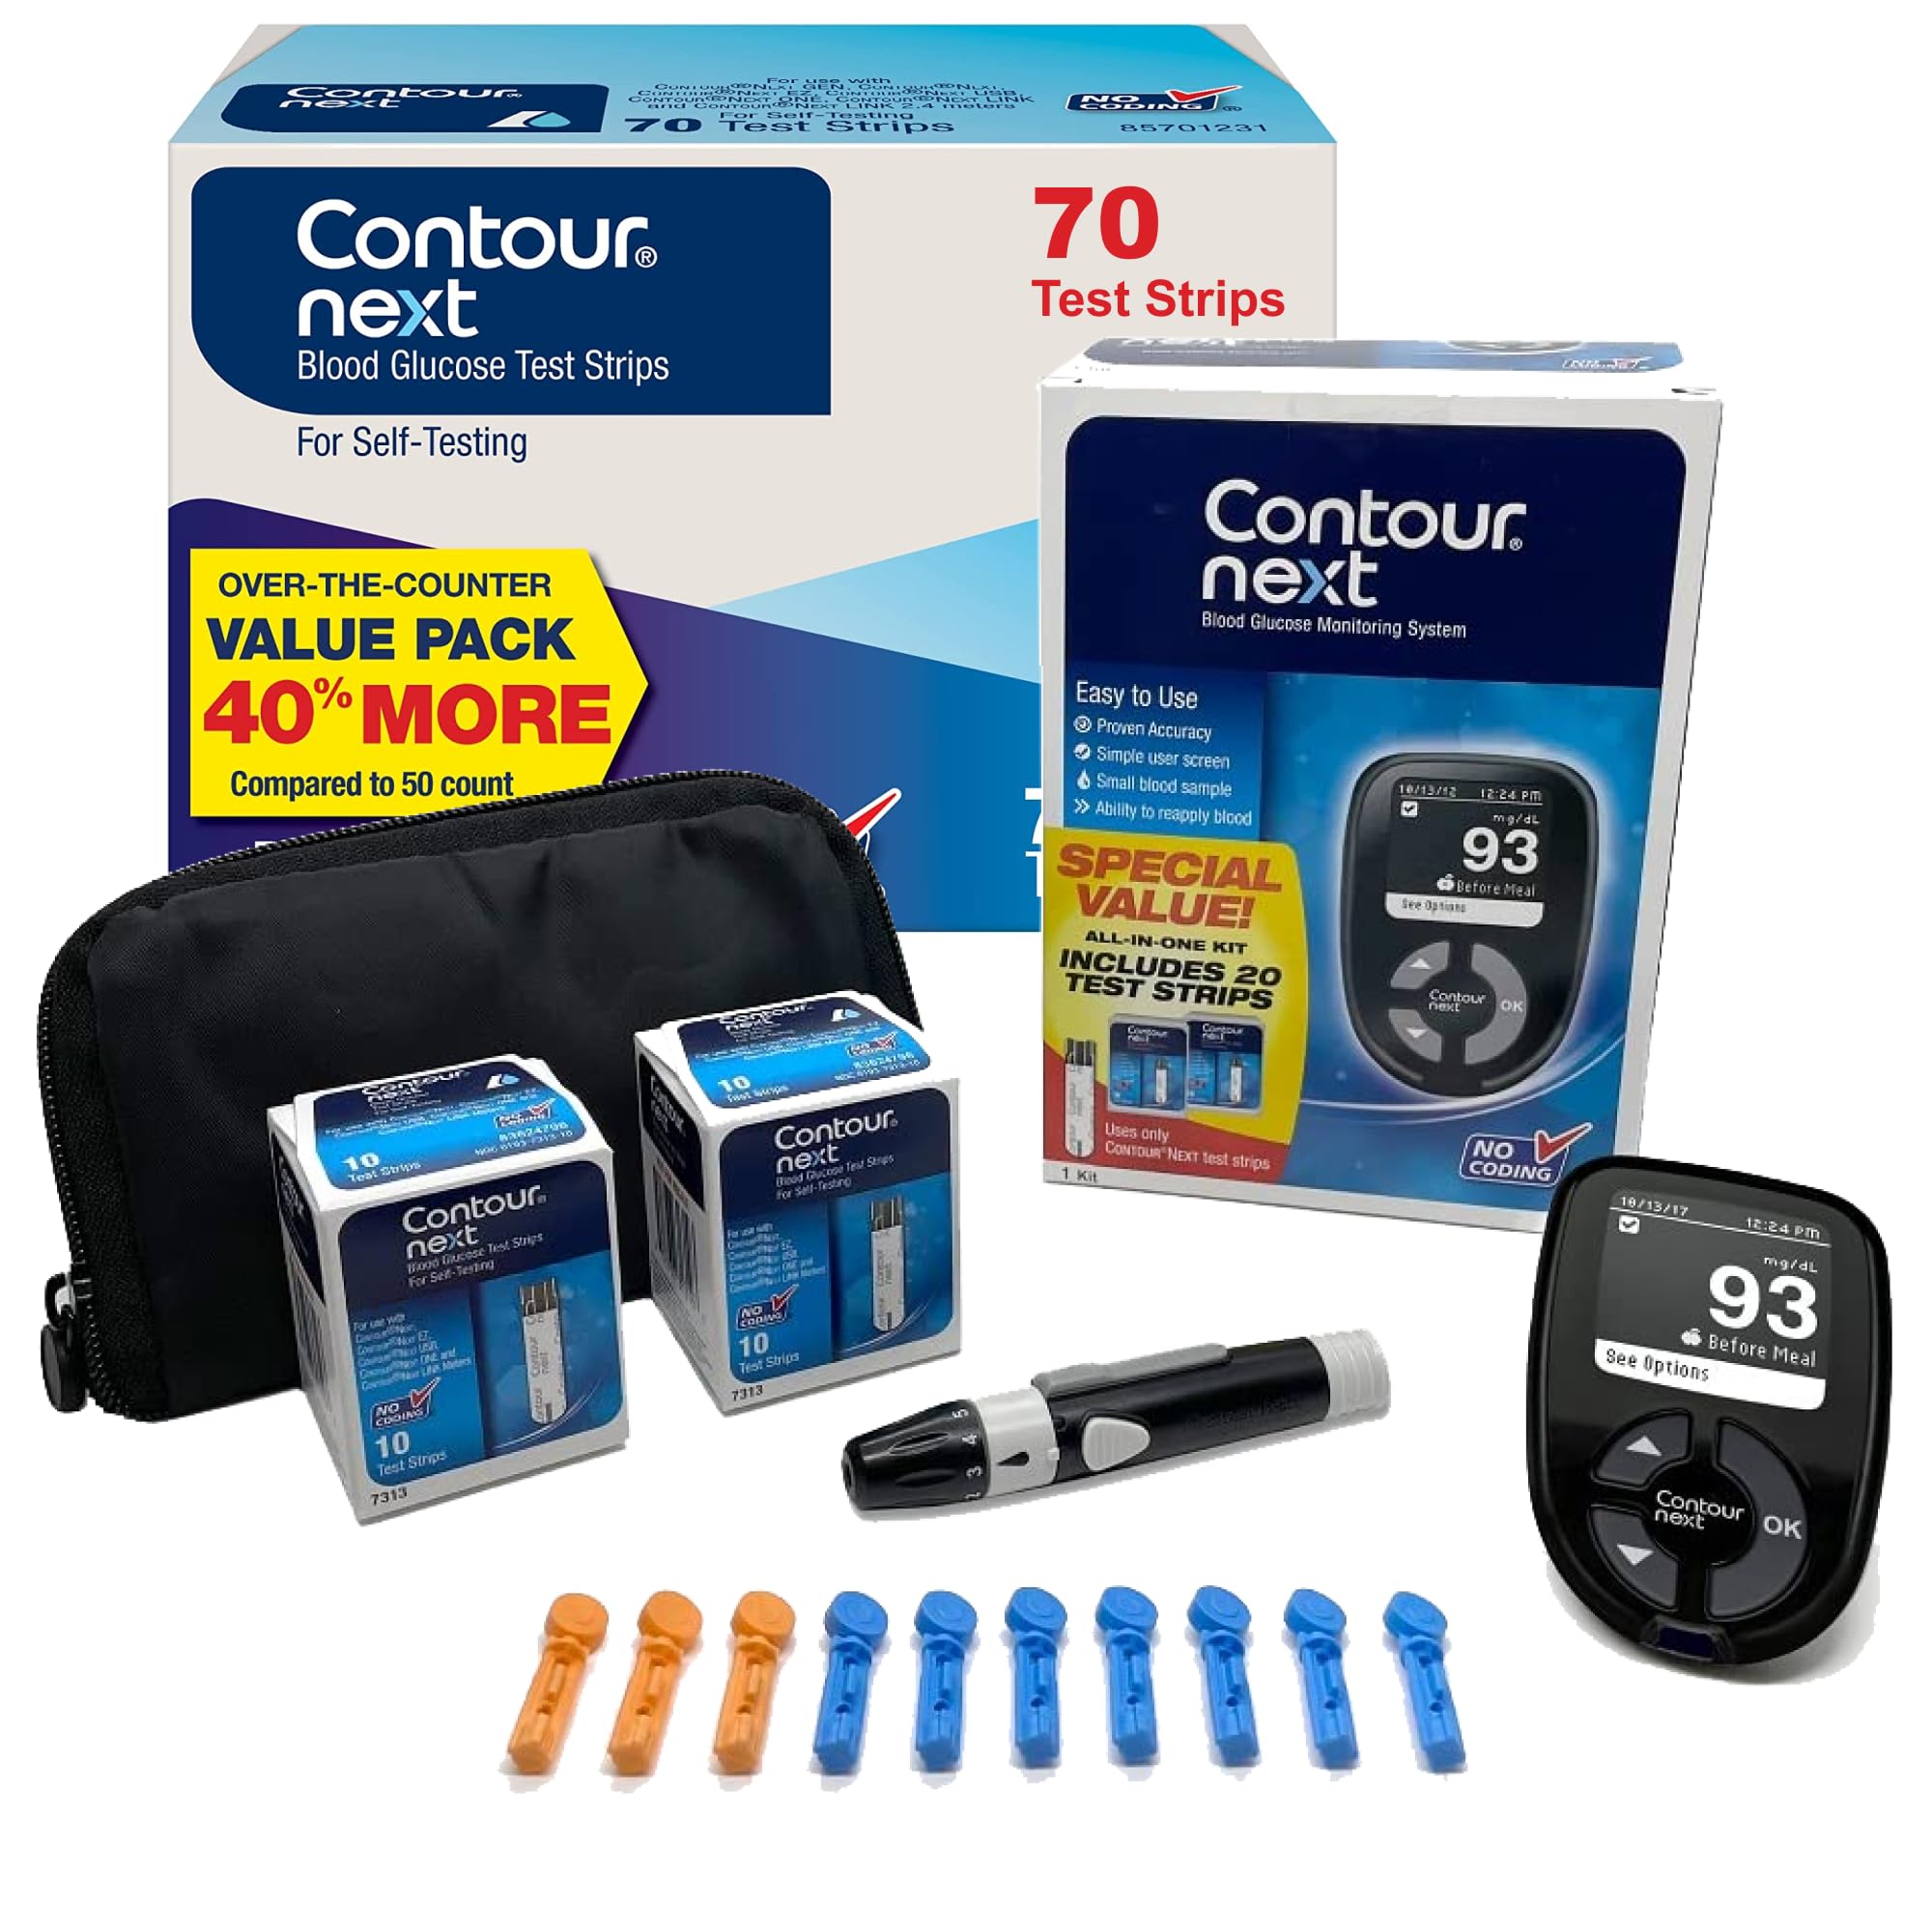 The Contour Next Blood Glucose Monitoring System All-in-One Kit for Diabetes & CONTOUR NEXT Blood Glucose Test Strips, 70 Count